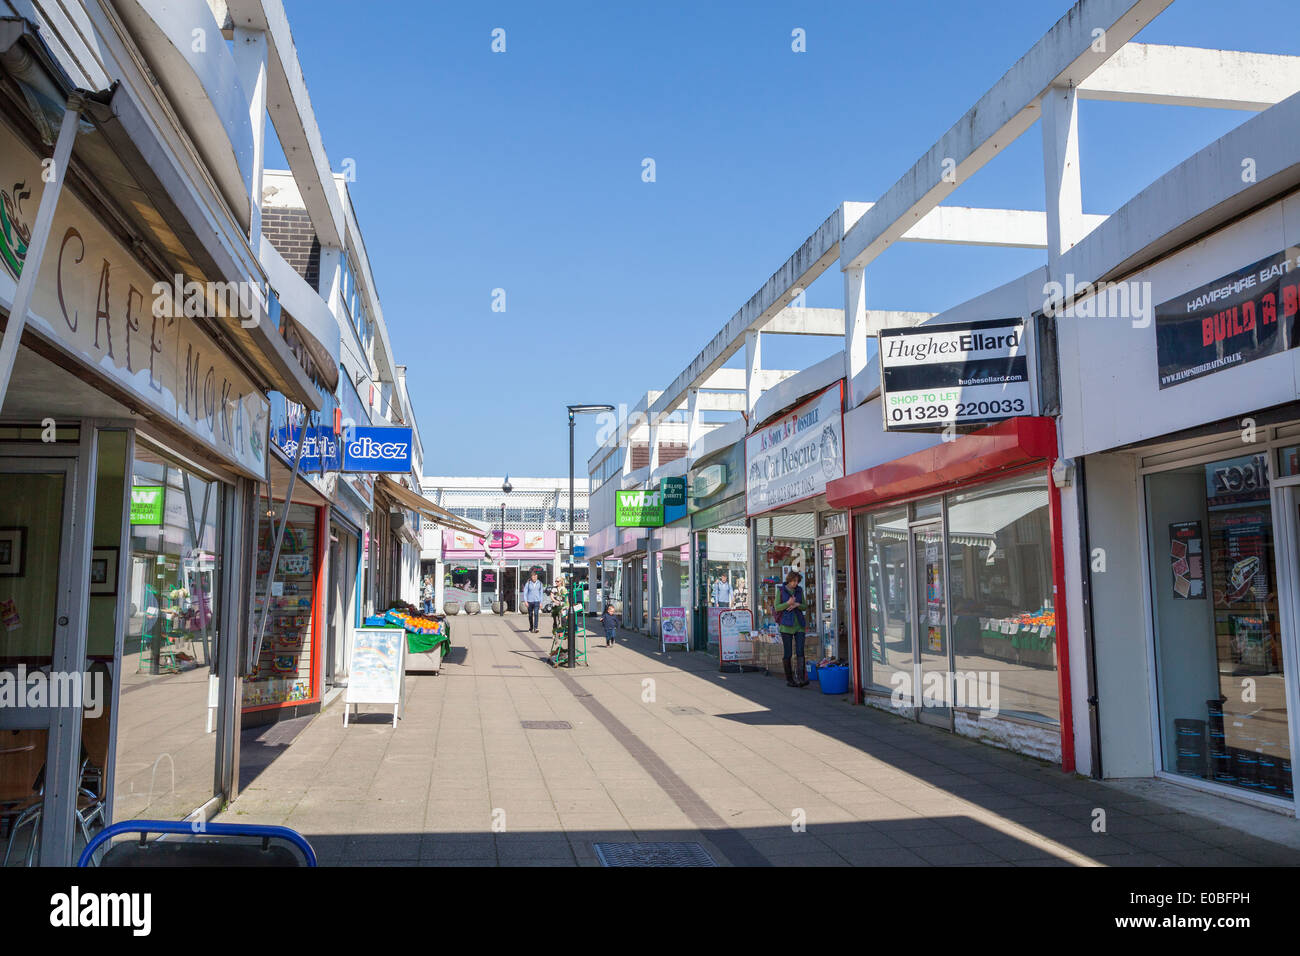 Small business shopping arcade of Dukes Walk Waterlooville. Stock Photo